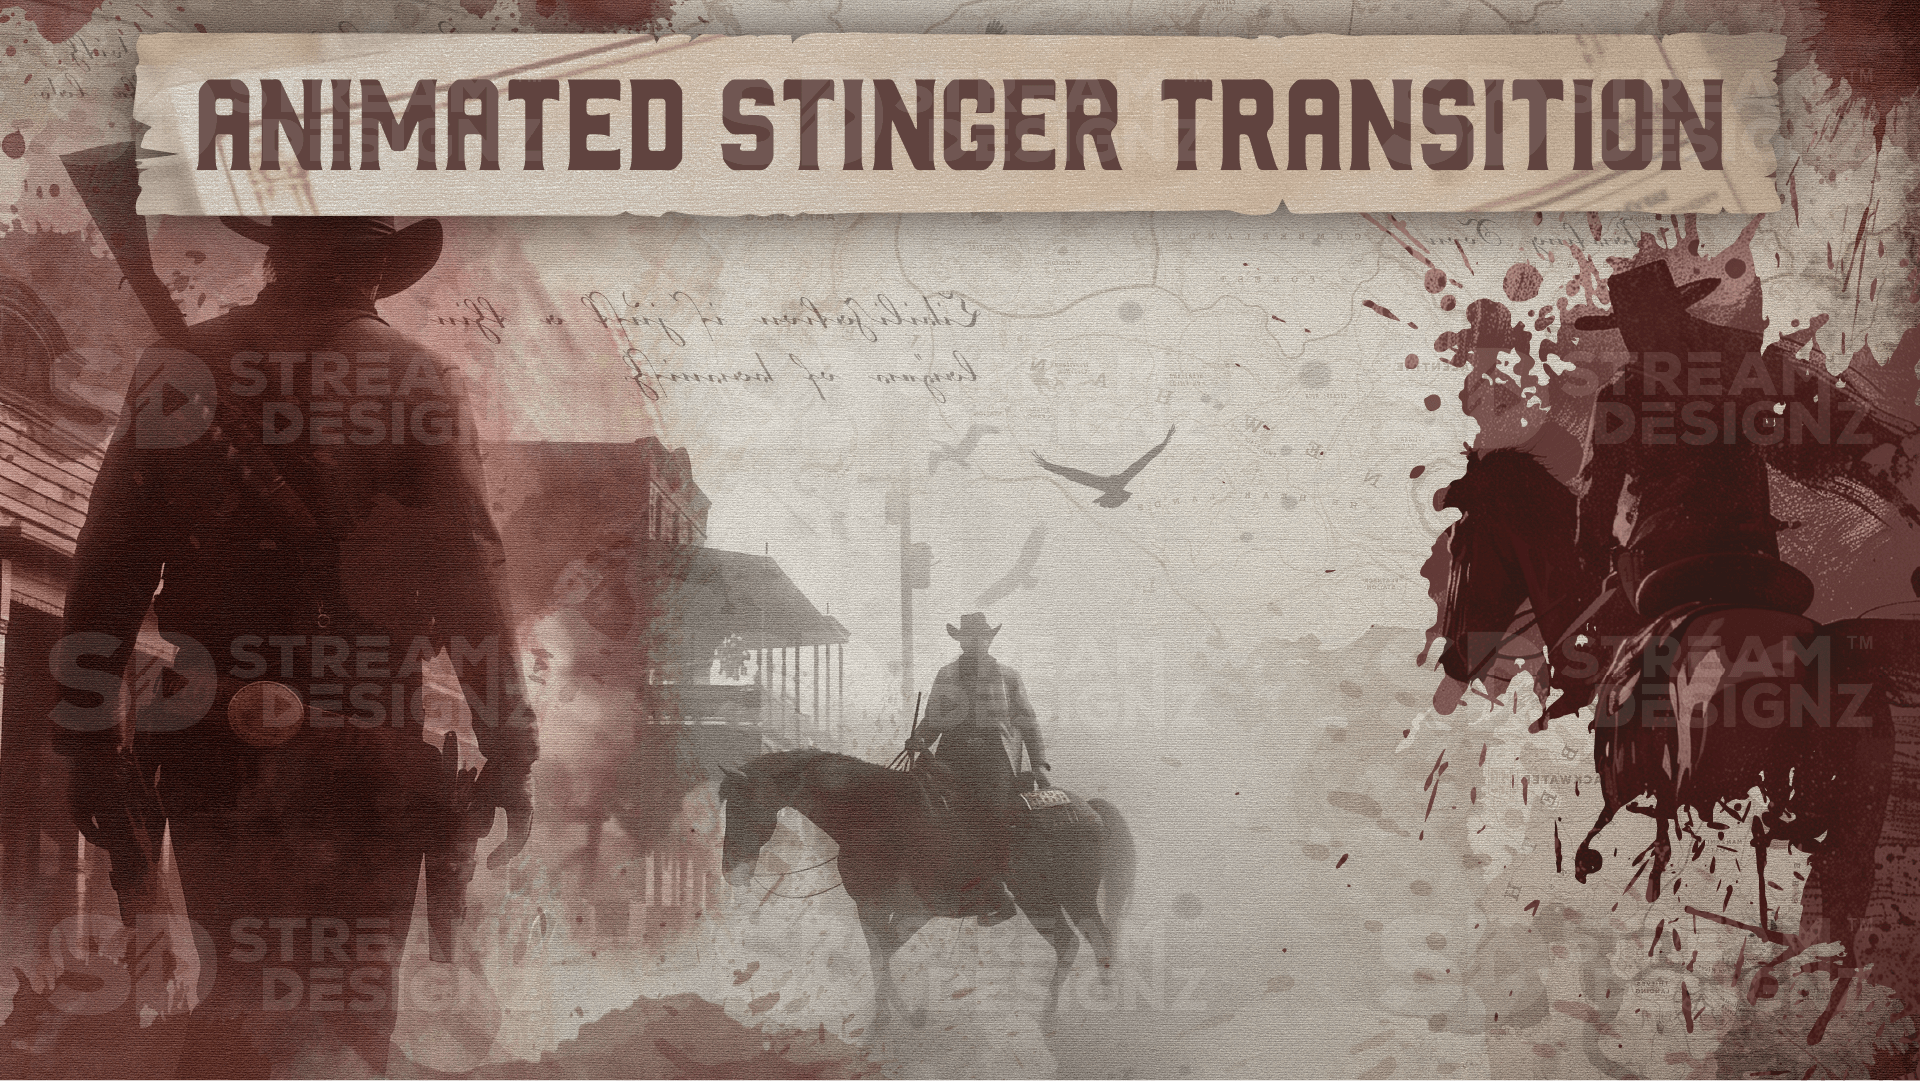 Ultimate stream package stinger transition outlaw stream designz